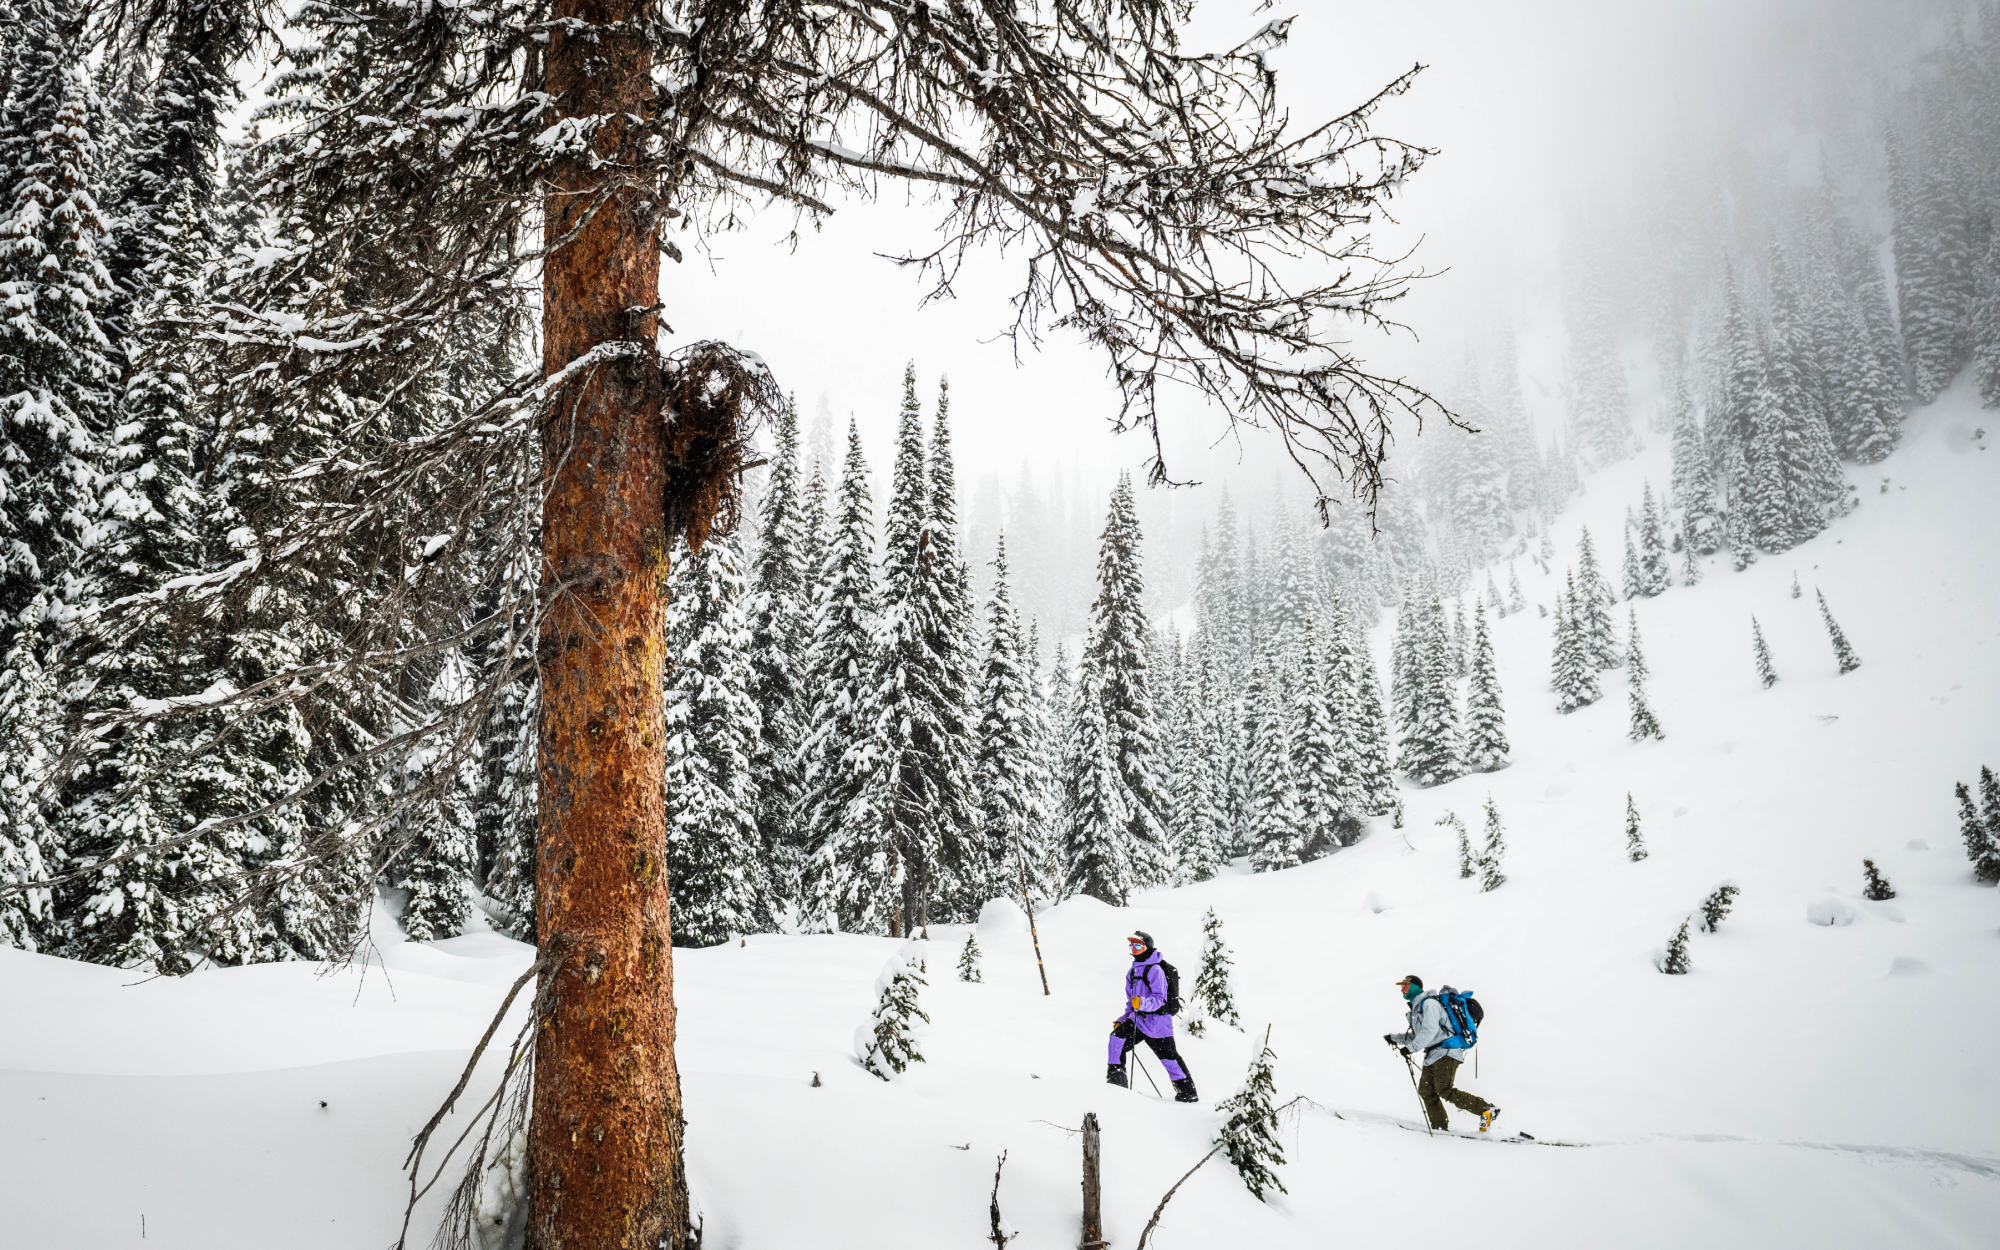 Hank Sowers and Director Ryan-Paul Collins making their own way through snow in the backcountry.